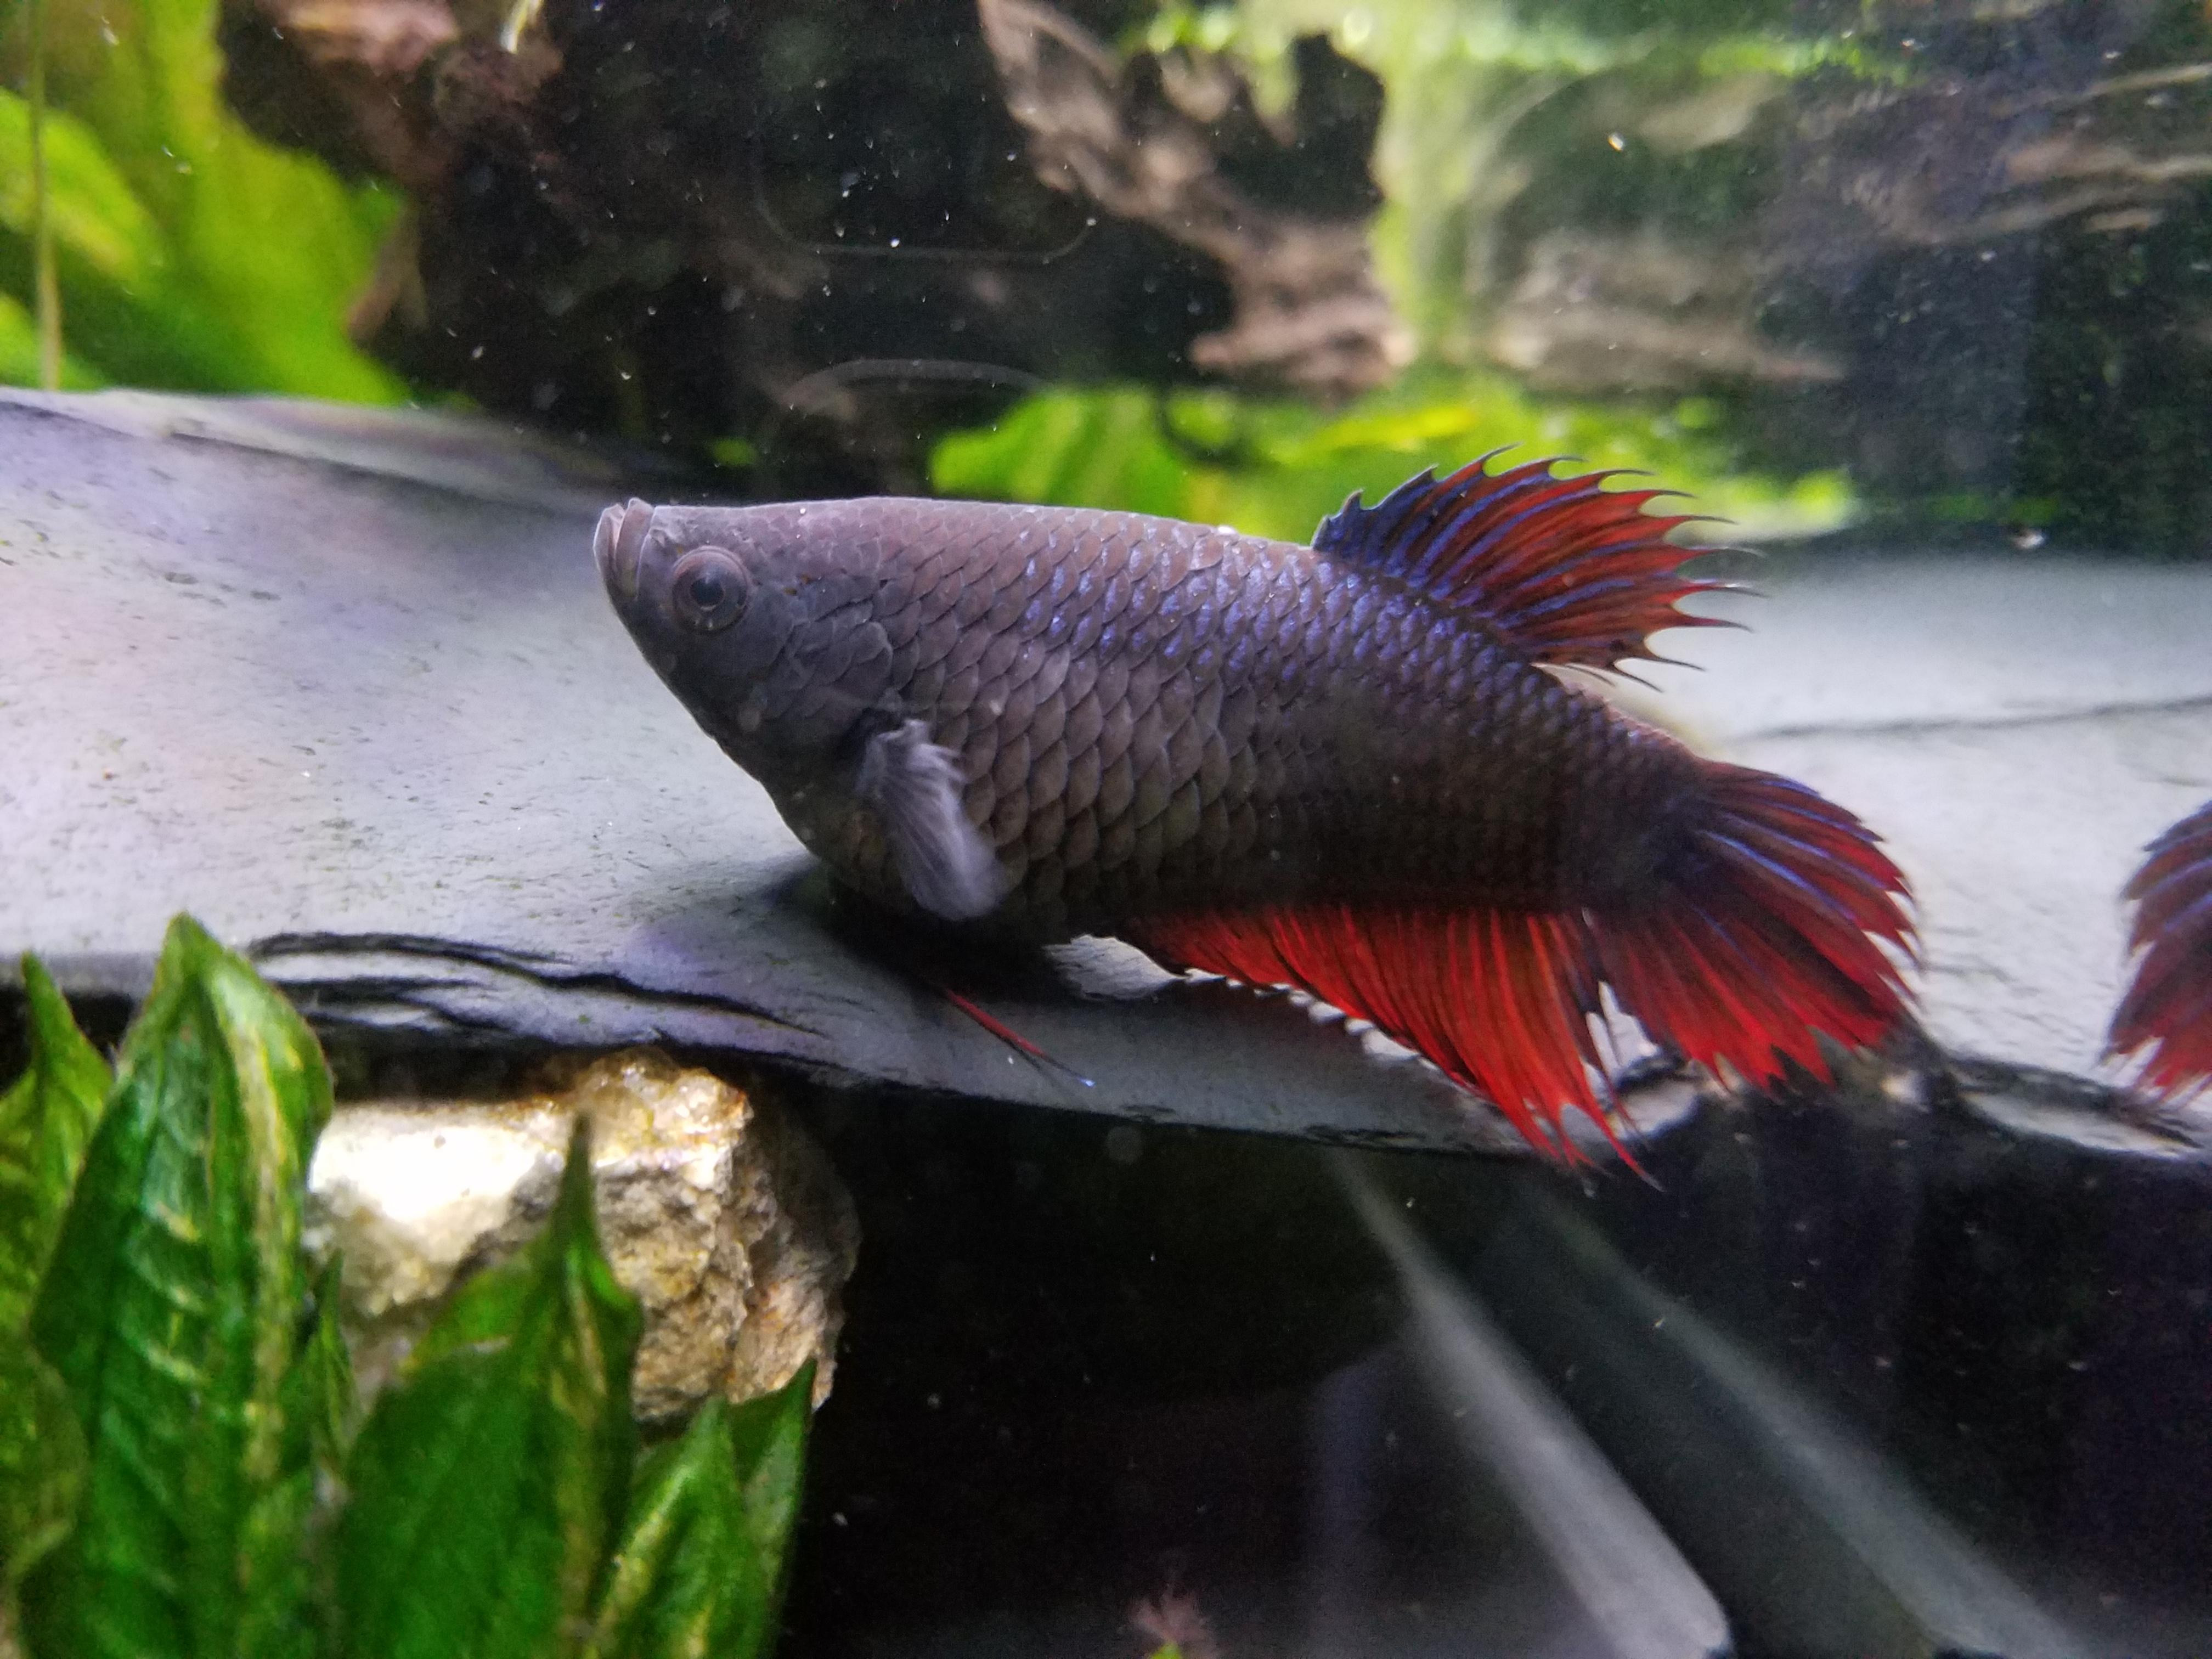 Symptoms and Treatment for Egg Bound Betta Fish